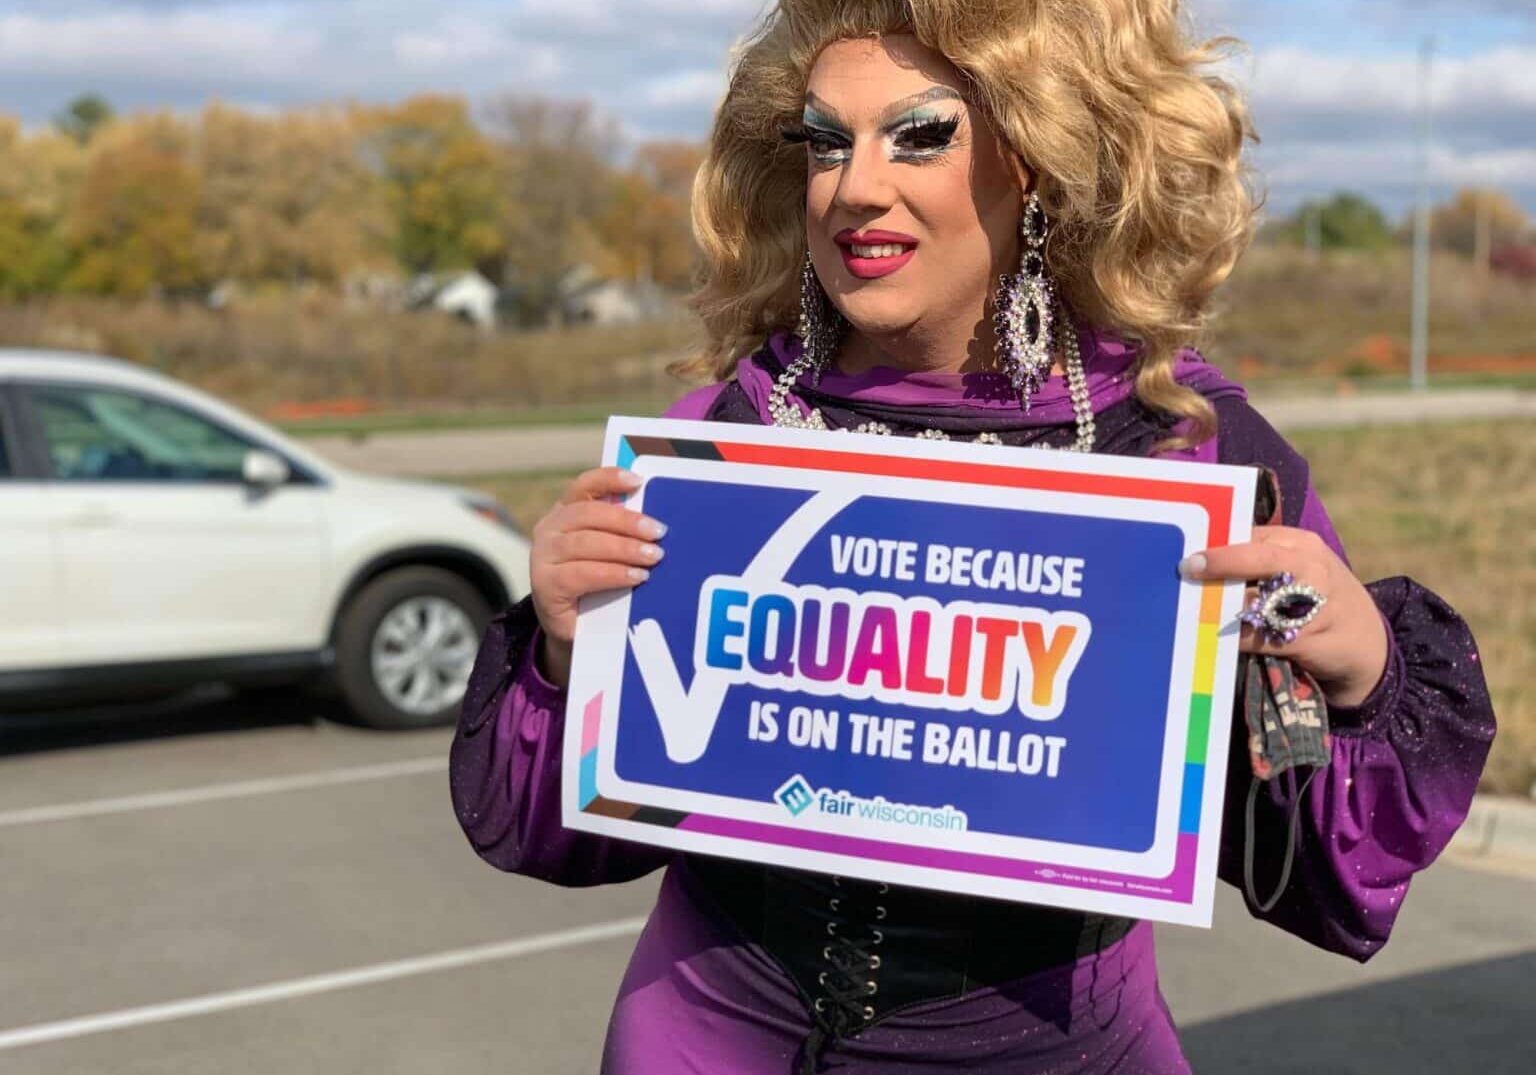 Vote Because Equality Is on the Ballot with the Fair Wisconsin Logo